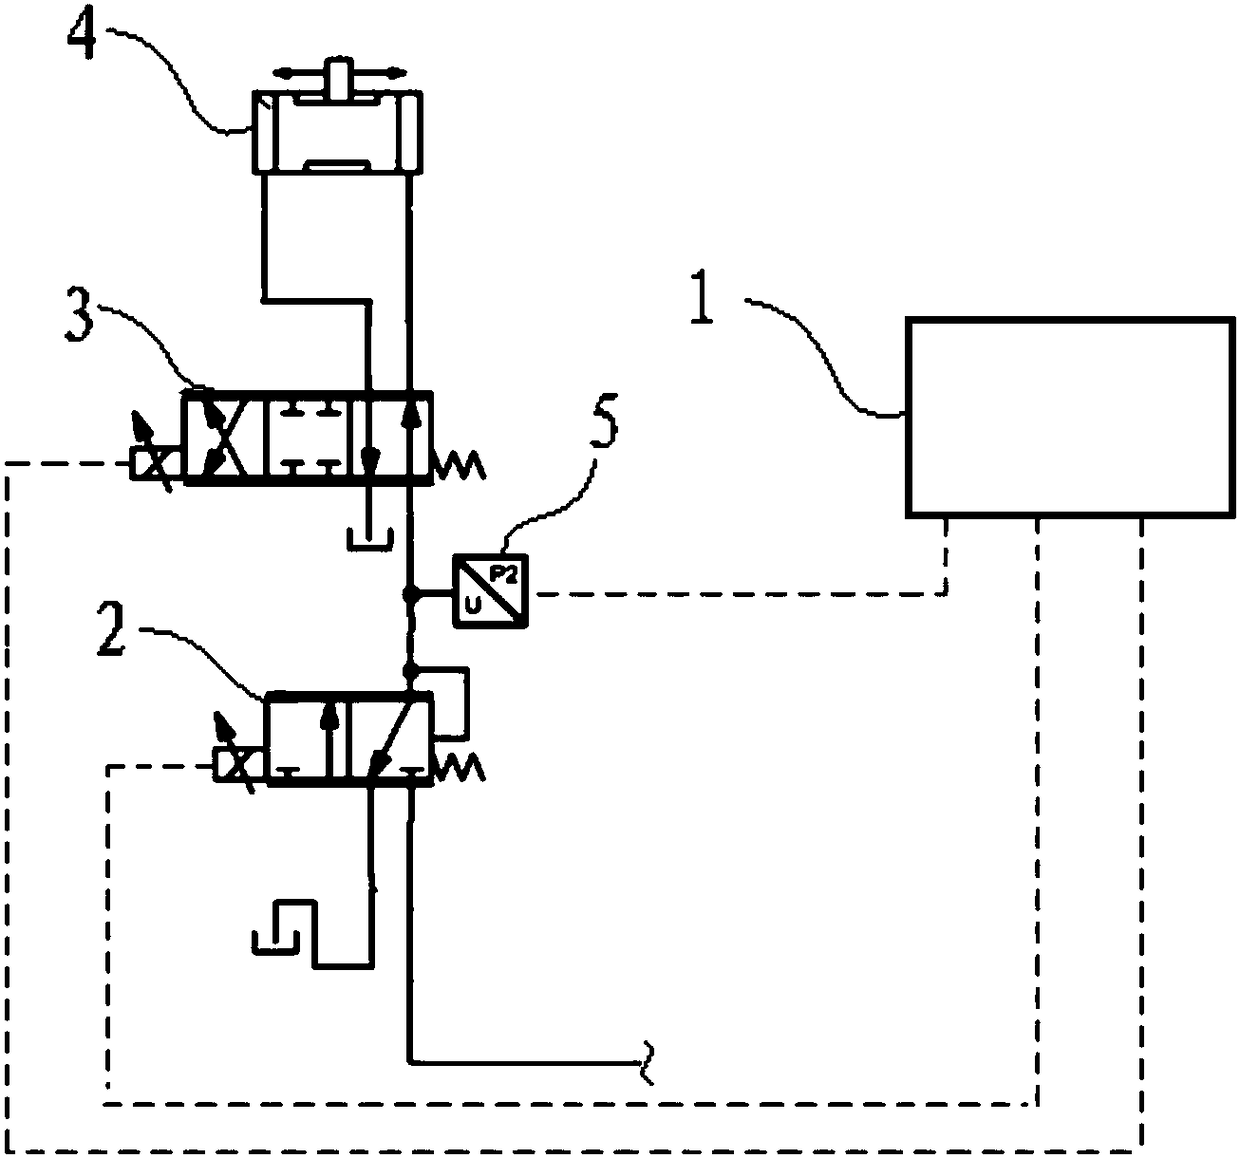 Control method and system for hydraulic shift actuator